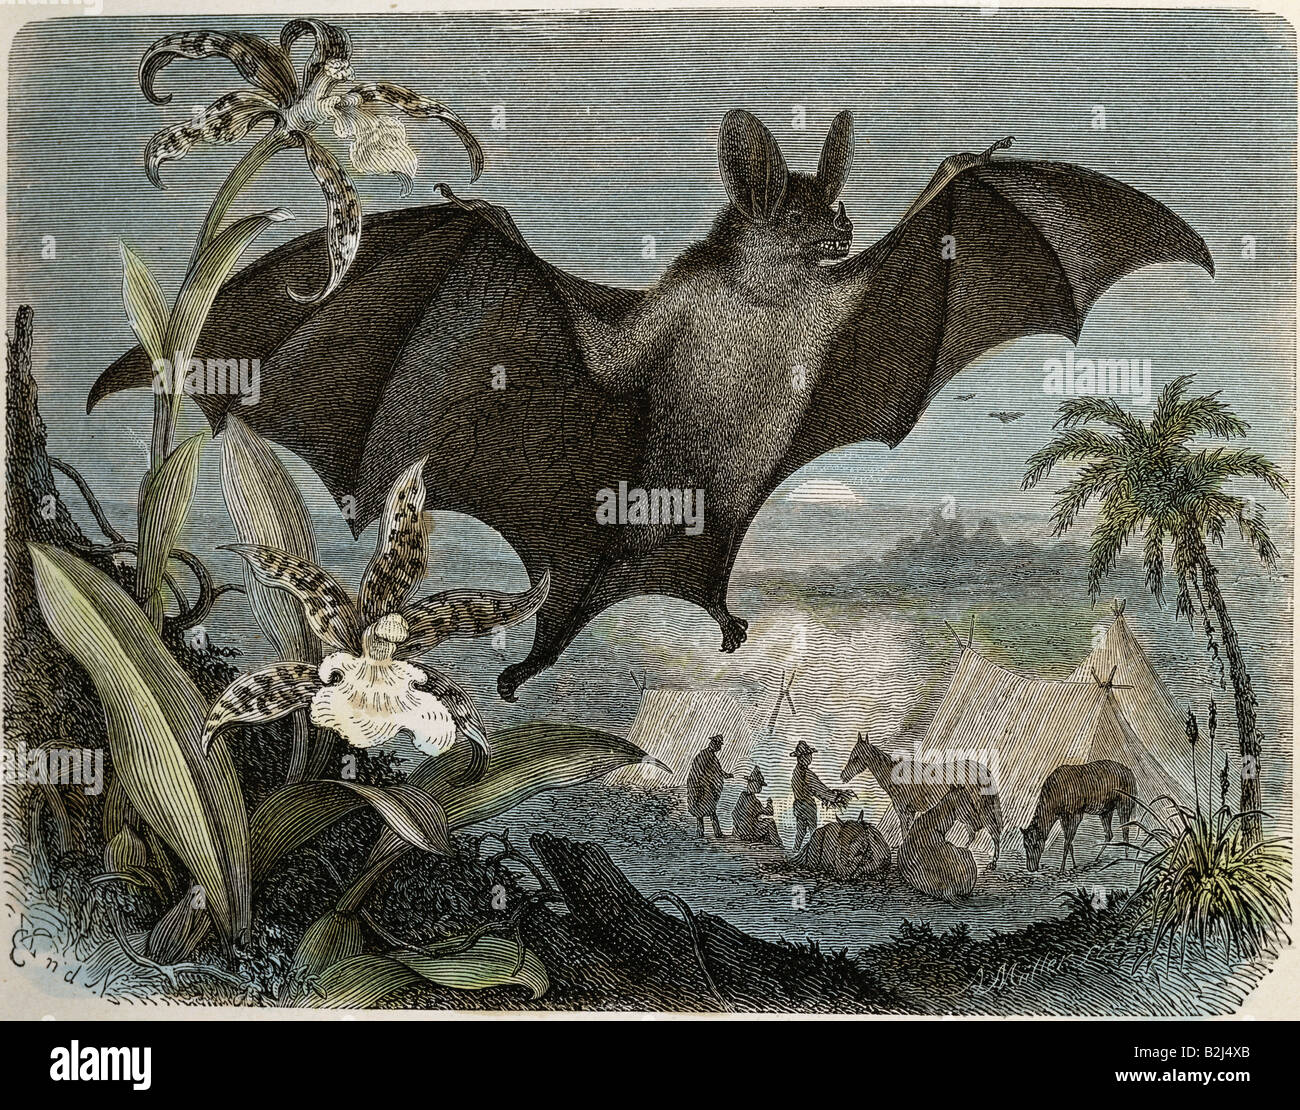 zoology / animals, mammal / mammalian, bats (Chiroptera), leaf-nosed bats (Phyllostomidae), Spectral bat (Vampyrum spectrum), wood engraving, coloured, from 'Die Saeugetiere', by Alfred Brehm, Leipzig, Germany, 1893, private collection, Stock Photo